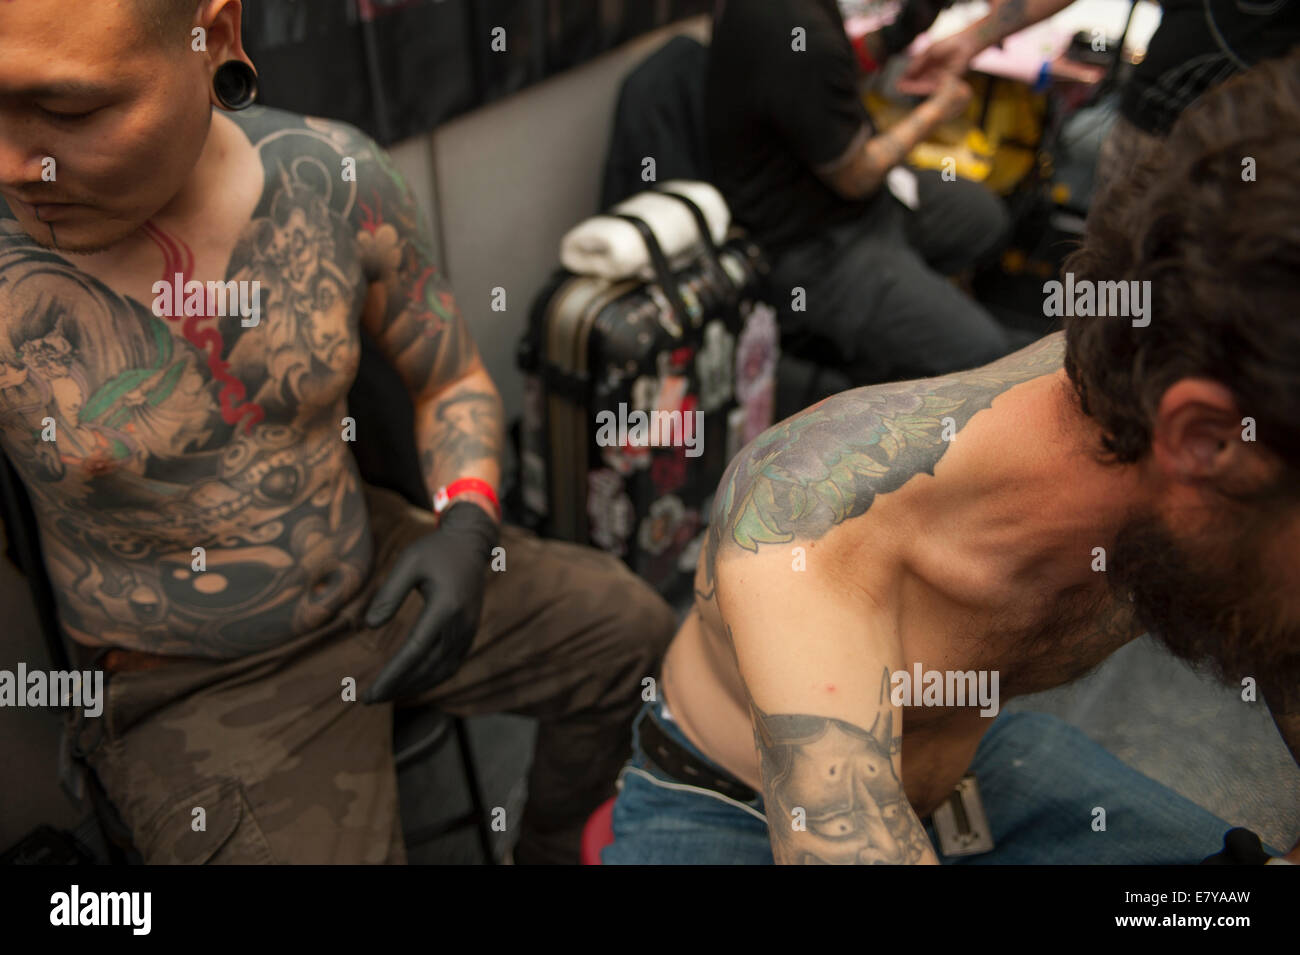 Tobacco Dock, Shadwell, London UK. 26th September 2014. 10th anniversary International London Tattoo Convention runs from 26th-28th September with artists demonstrating their skills. Credit:  Malcolm Park editorial/Alamy Live News. Stock Photo